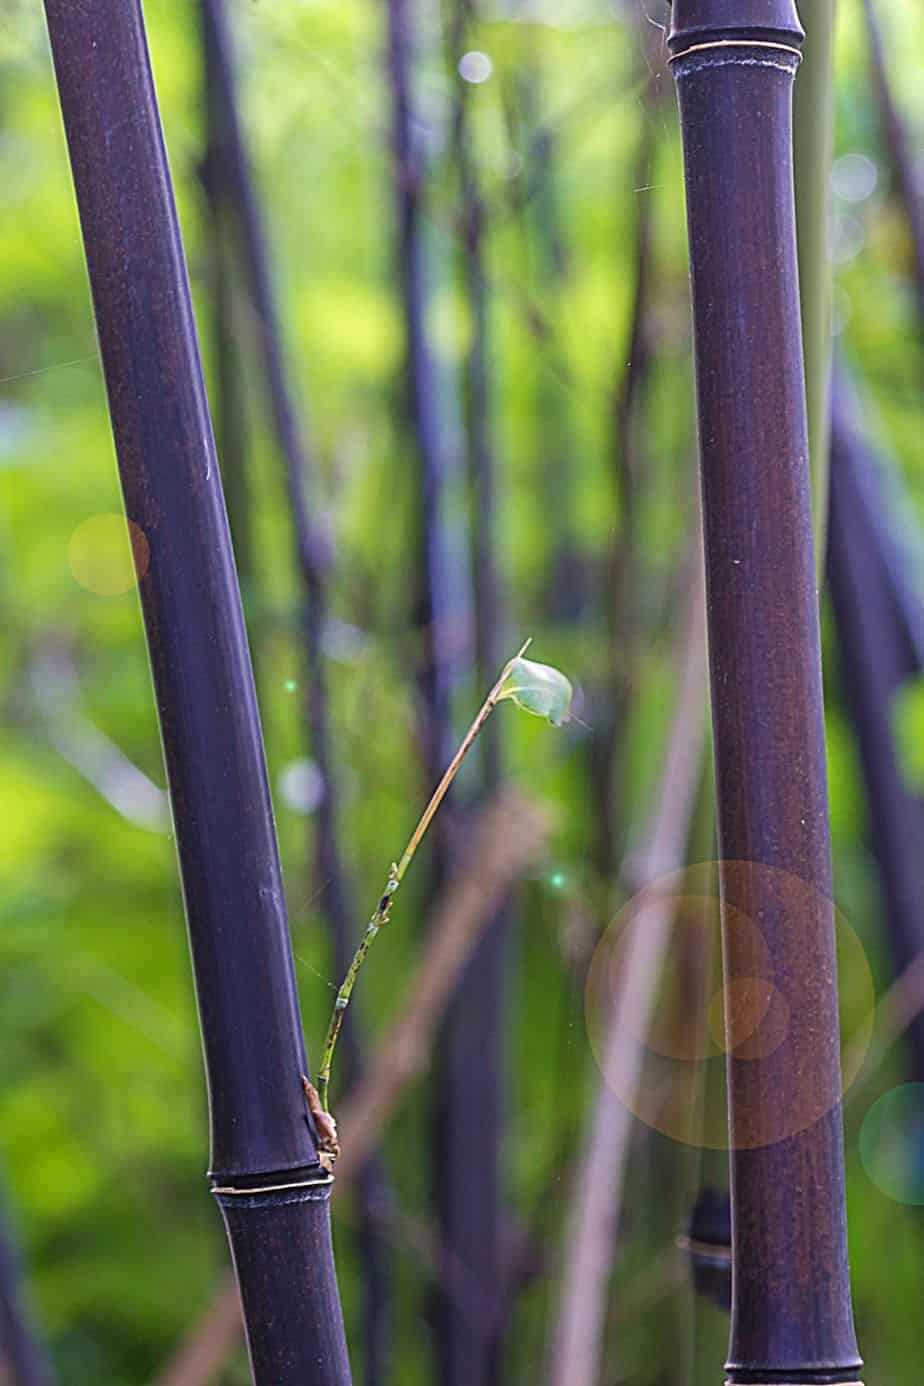 Black Bamboo, with its 25-meter long canes, is a perfect accessory plant to provide shade to your partial-shade requiring plants in your southeast facing garden